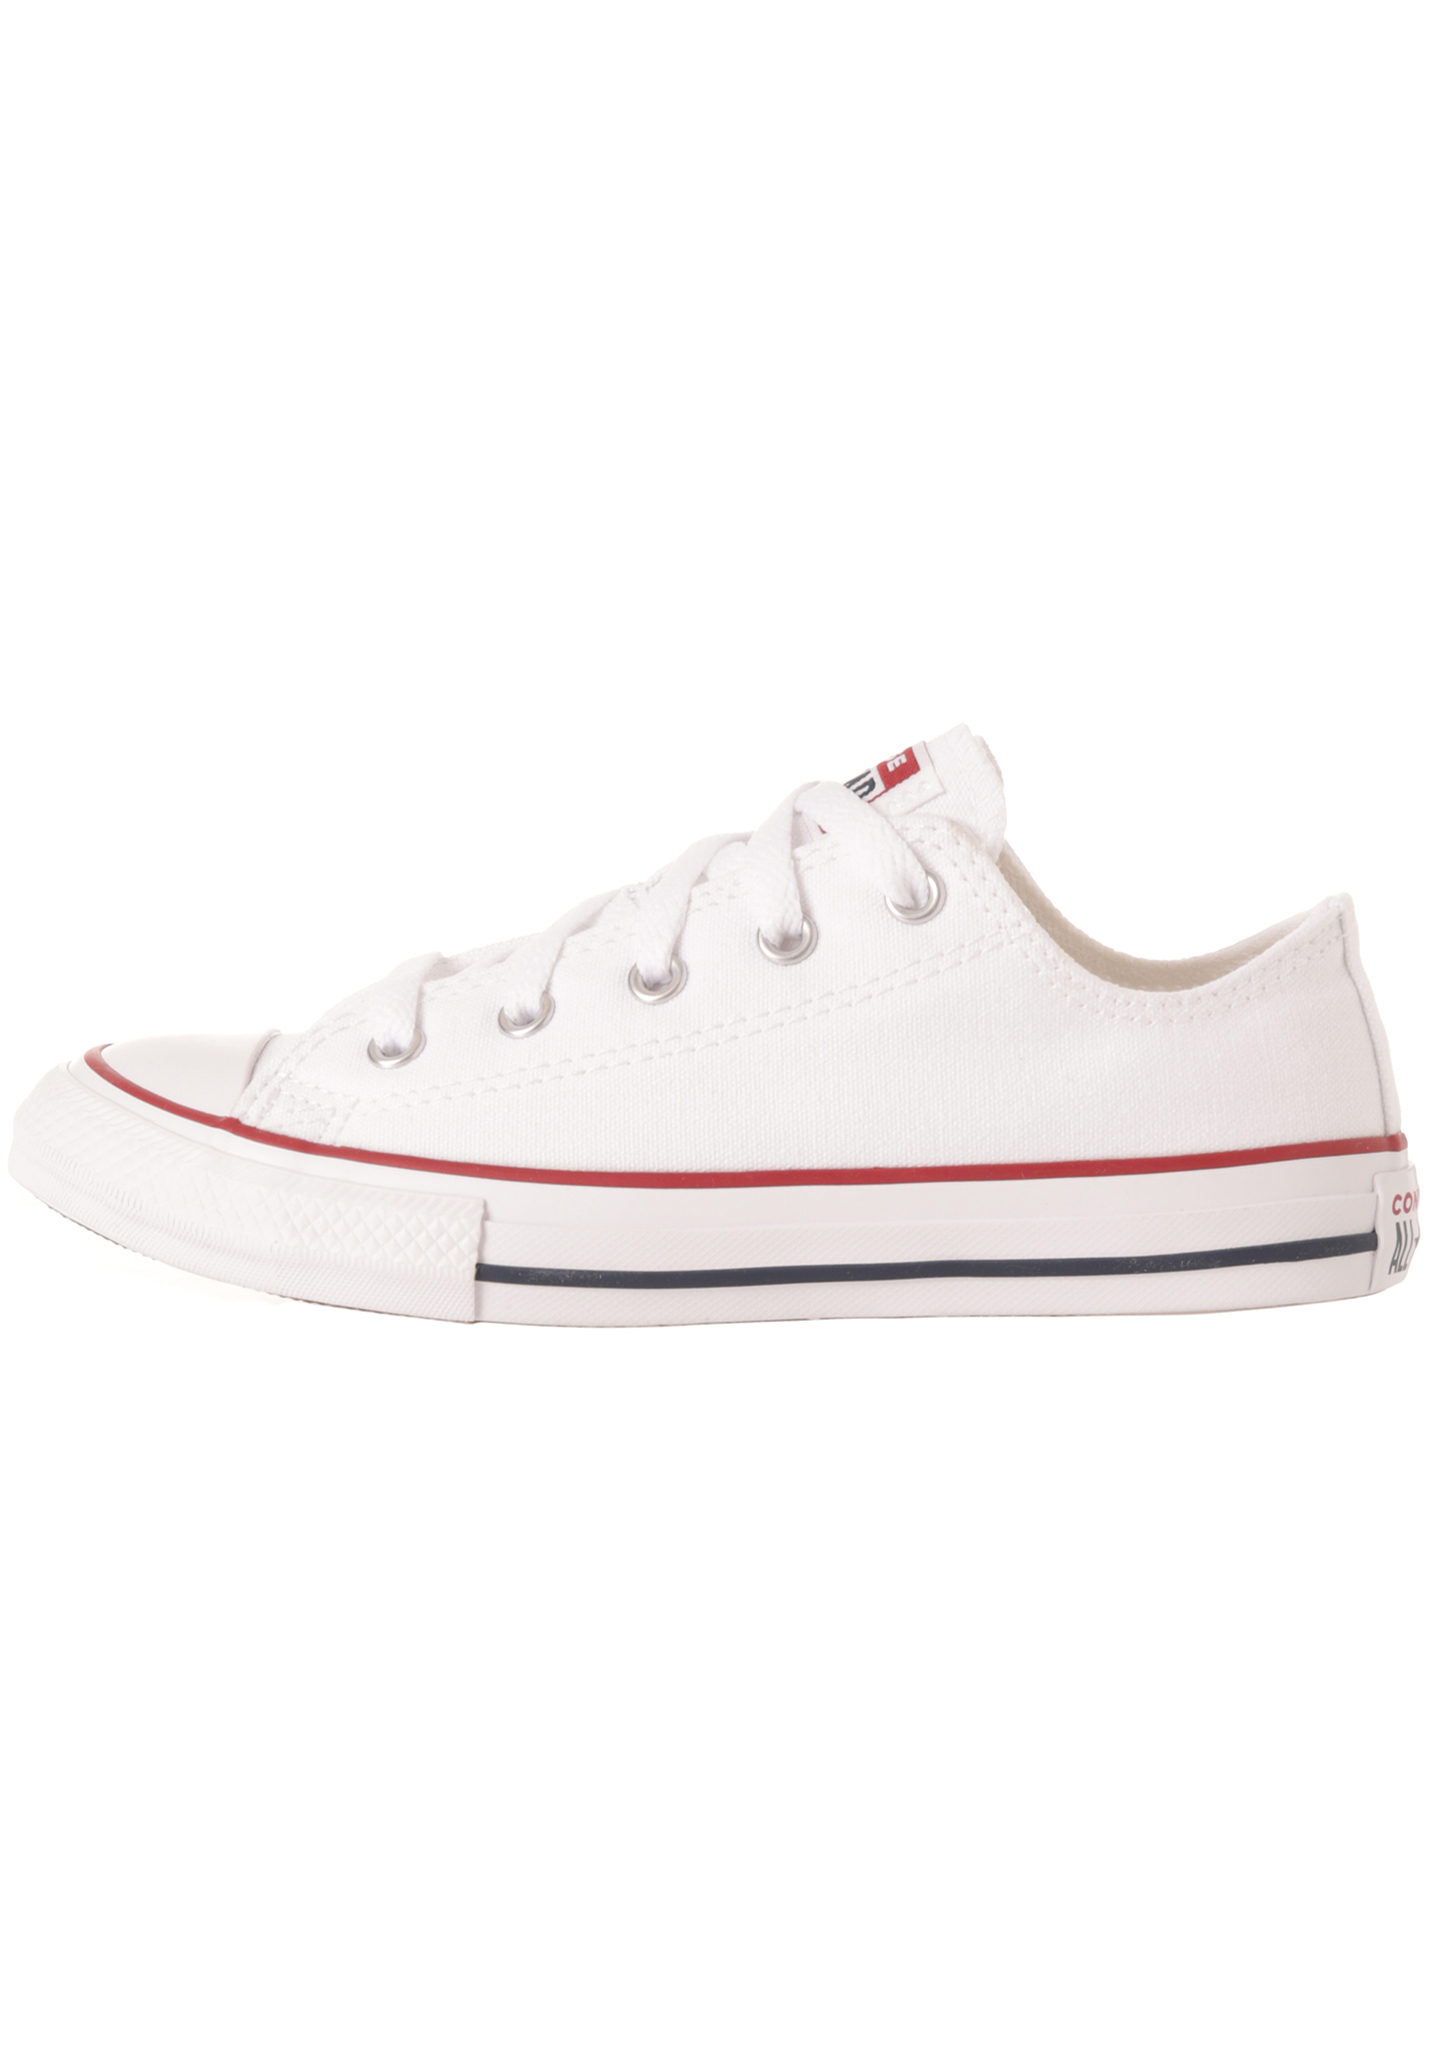 Converse Chuck Taylor All Star Ox Sneaker Low optical white 27